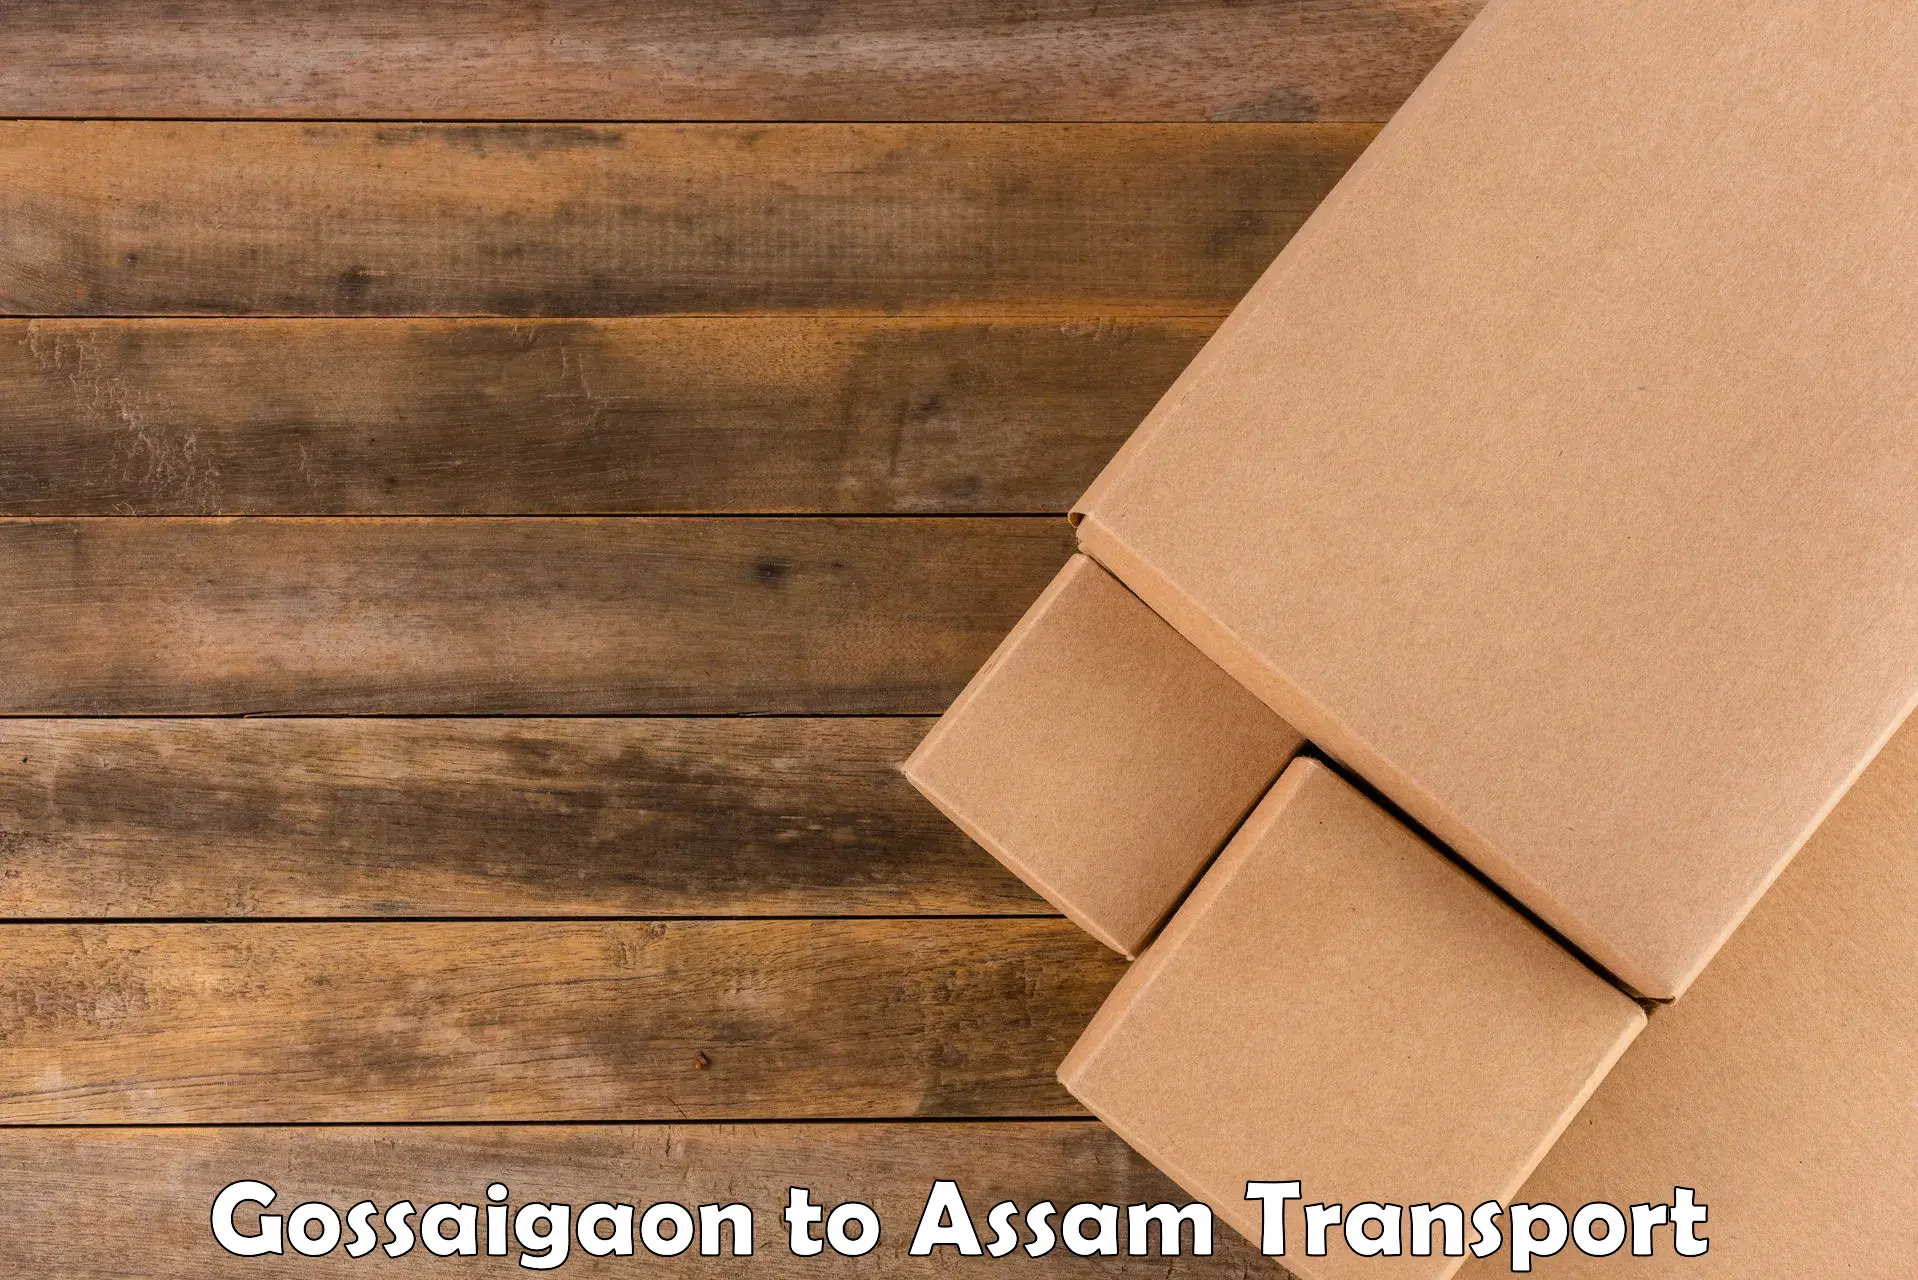 Air cargo transport services in Gossaigaon to Dalgaon